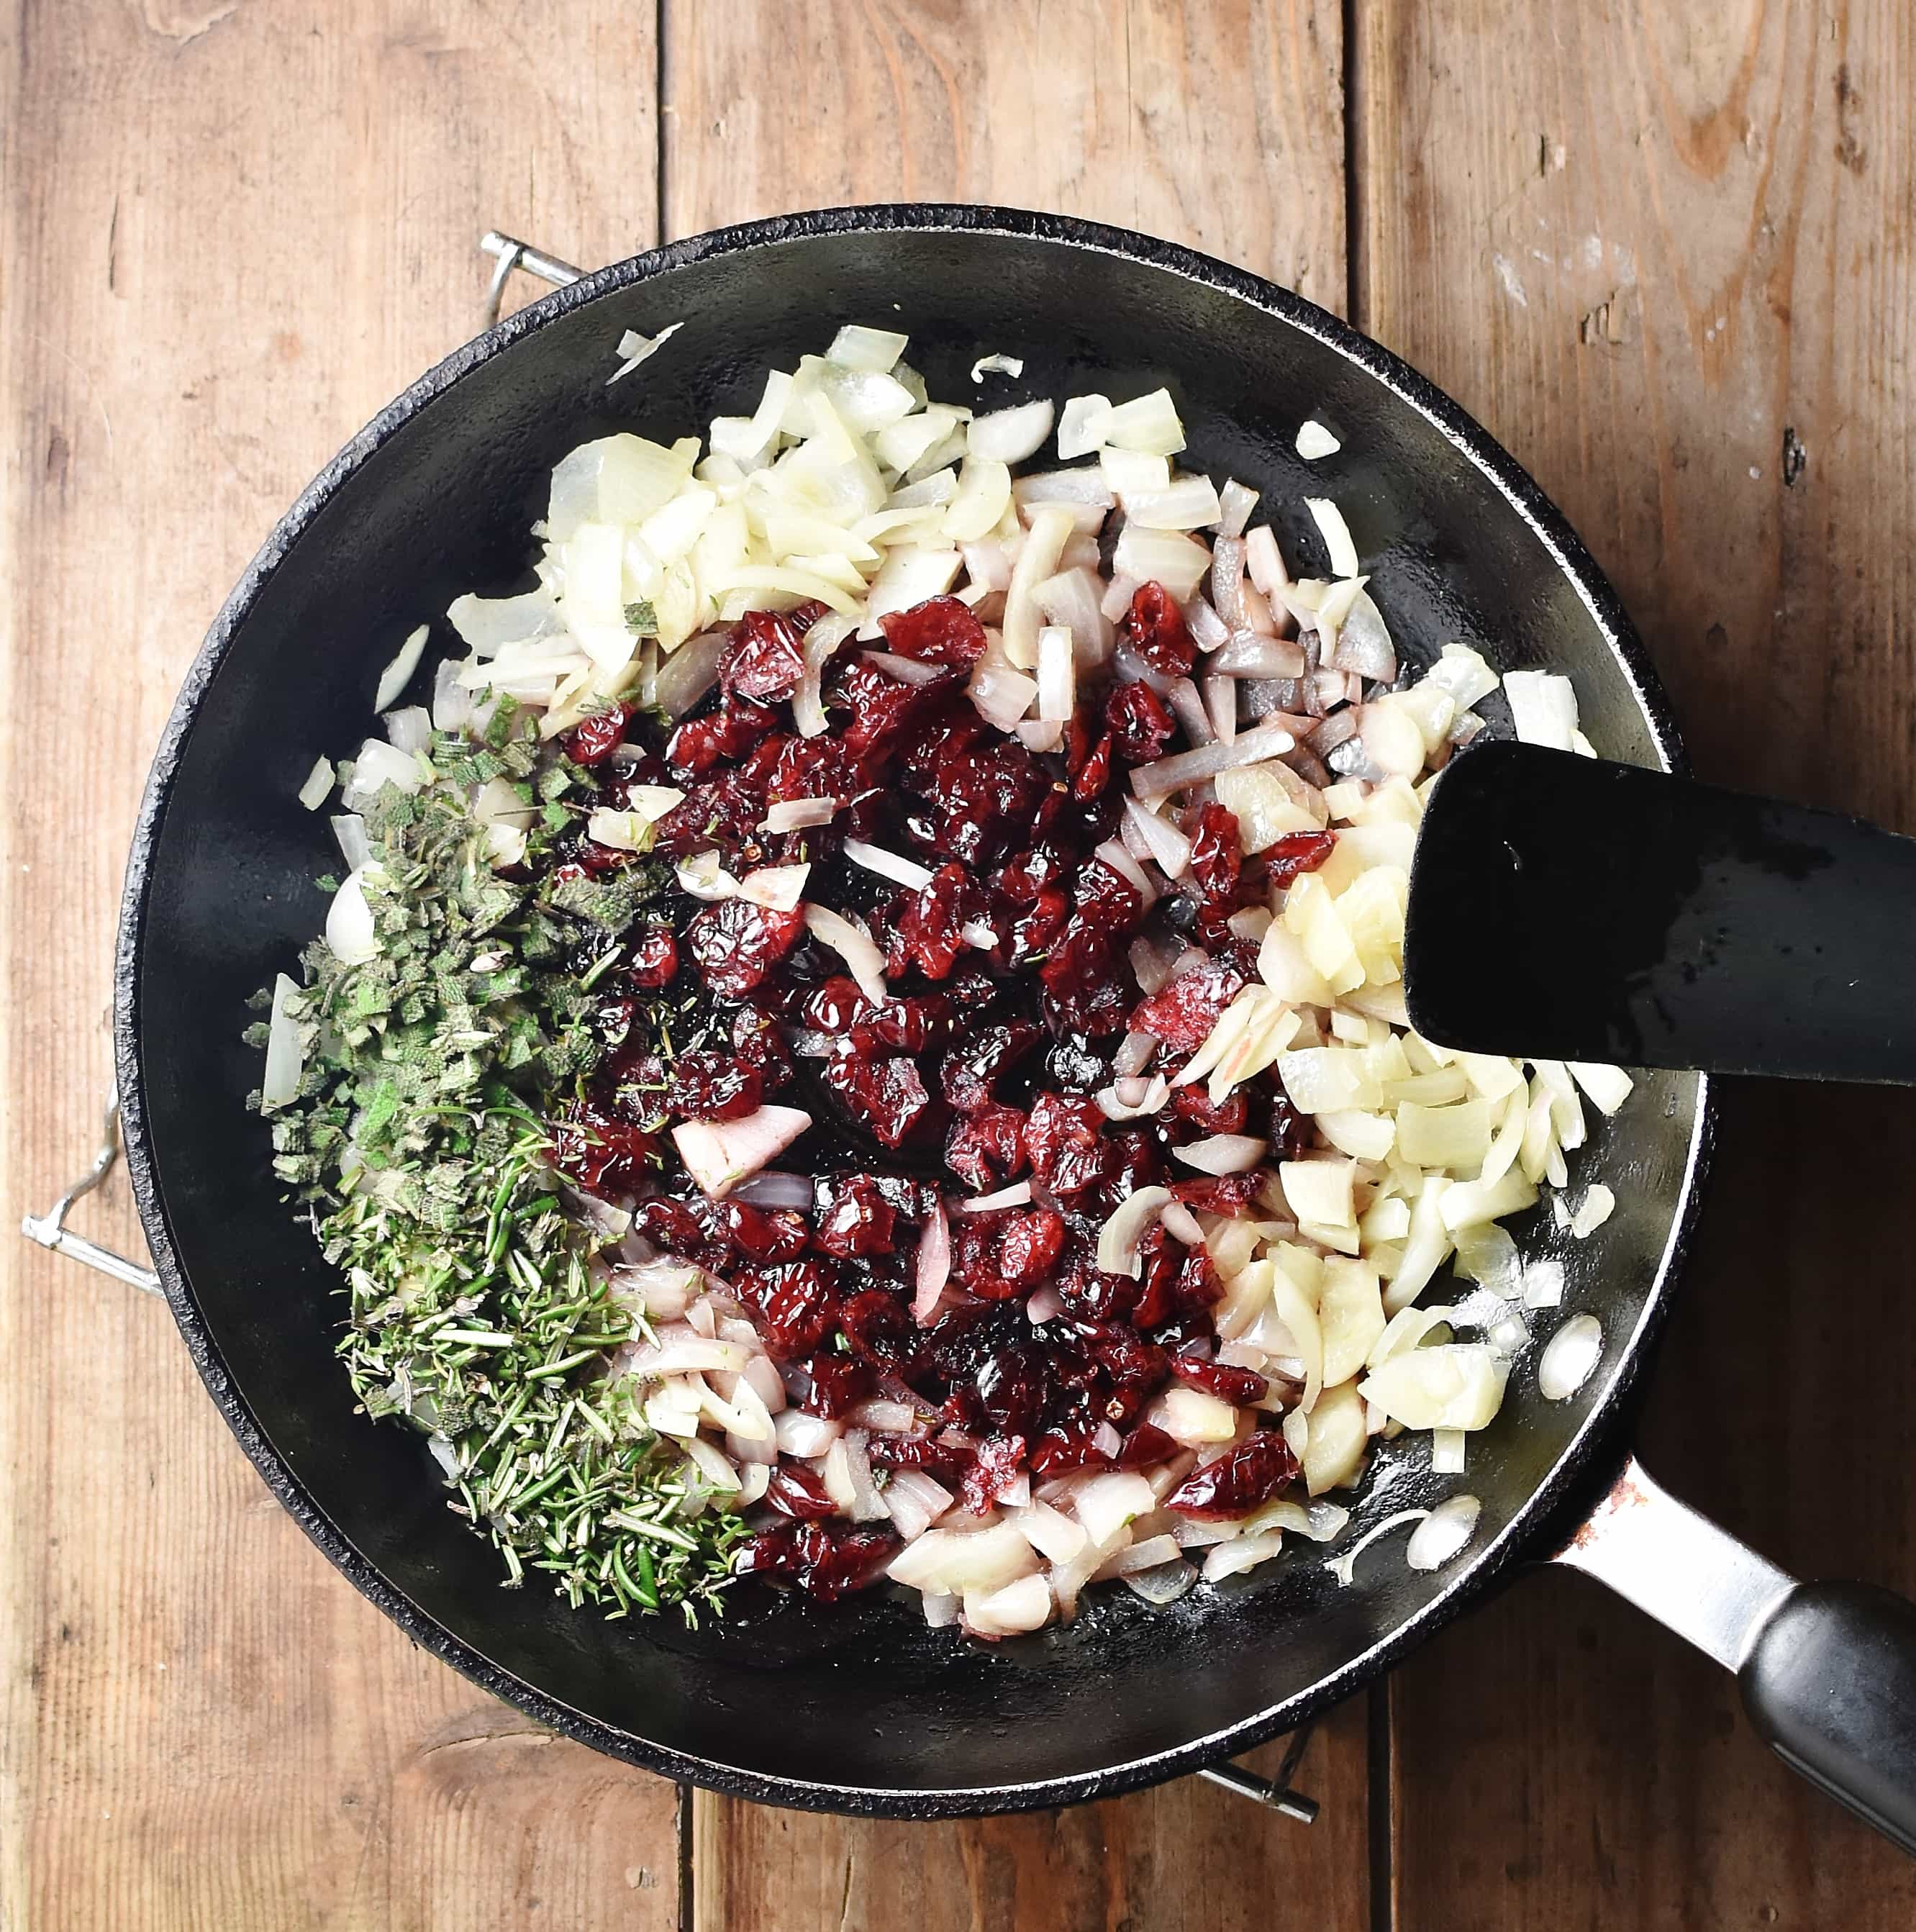 Chopped onion, cranberries and herbs in skillet with black spatula.